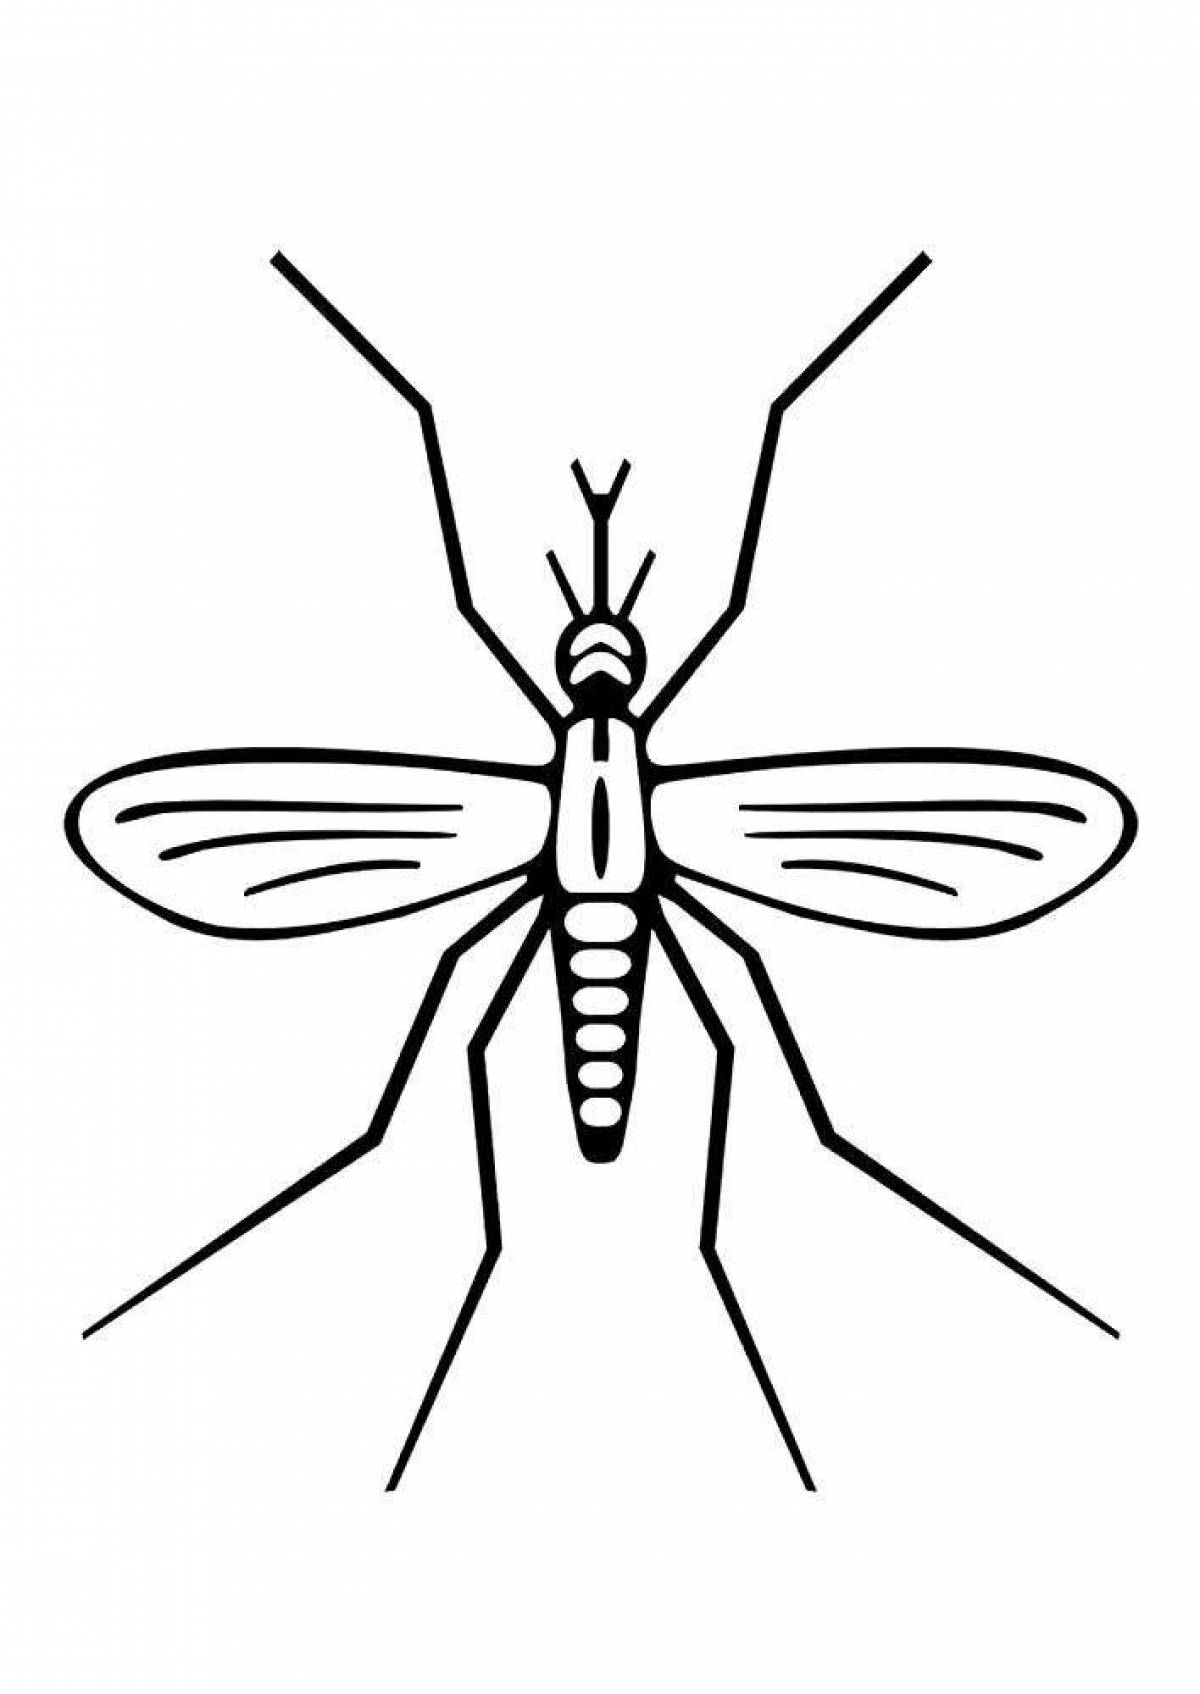 Outstanding mosquito coloring book for kids